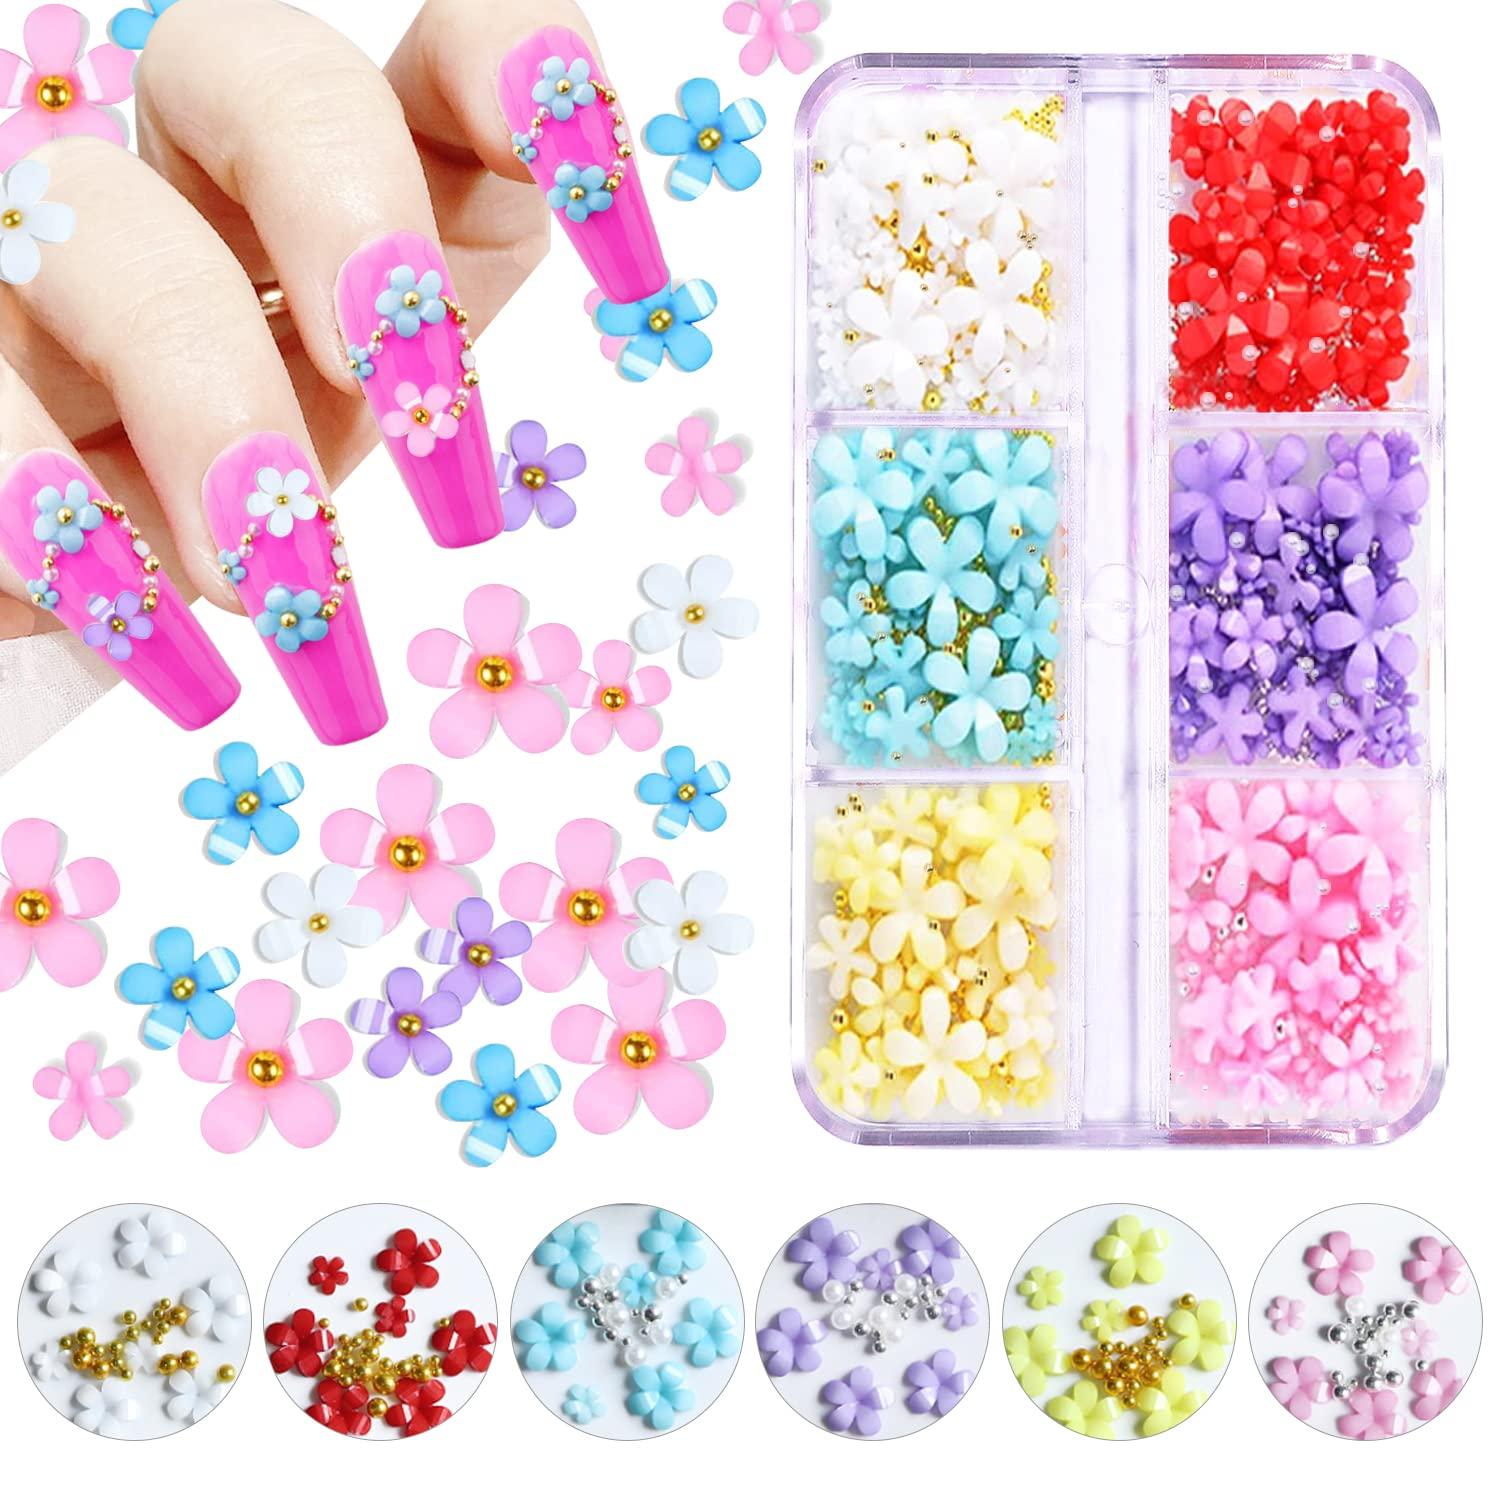  3D Flower Nail Charms, 6 Grids Acrylic Flower for Nails Art Decals  Charms with White Gold Pearl Blossom Caviar Beads Flores, Nail Art Design  for DIY Jewelry Craft Decorations Manicure Accessories 